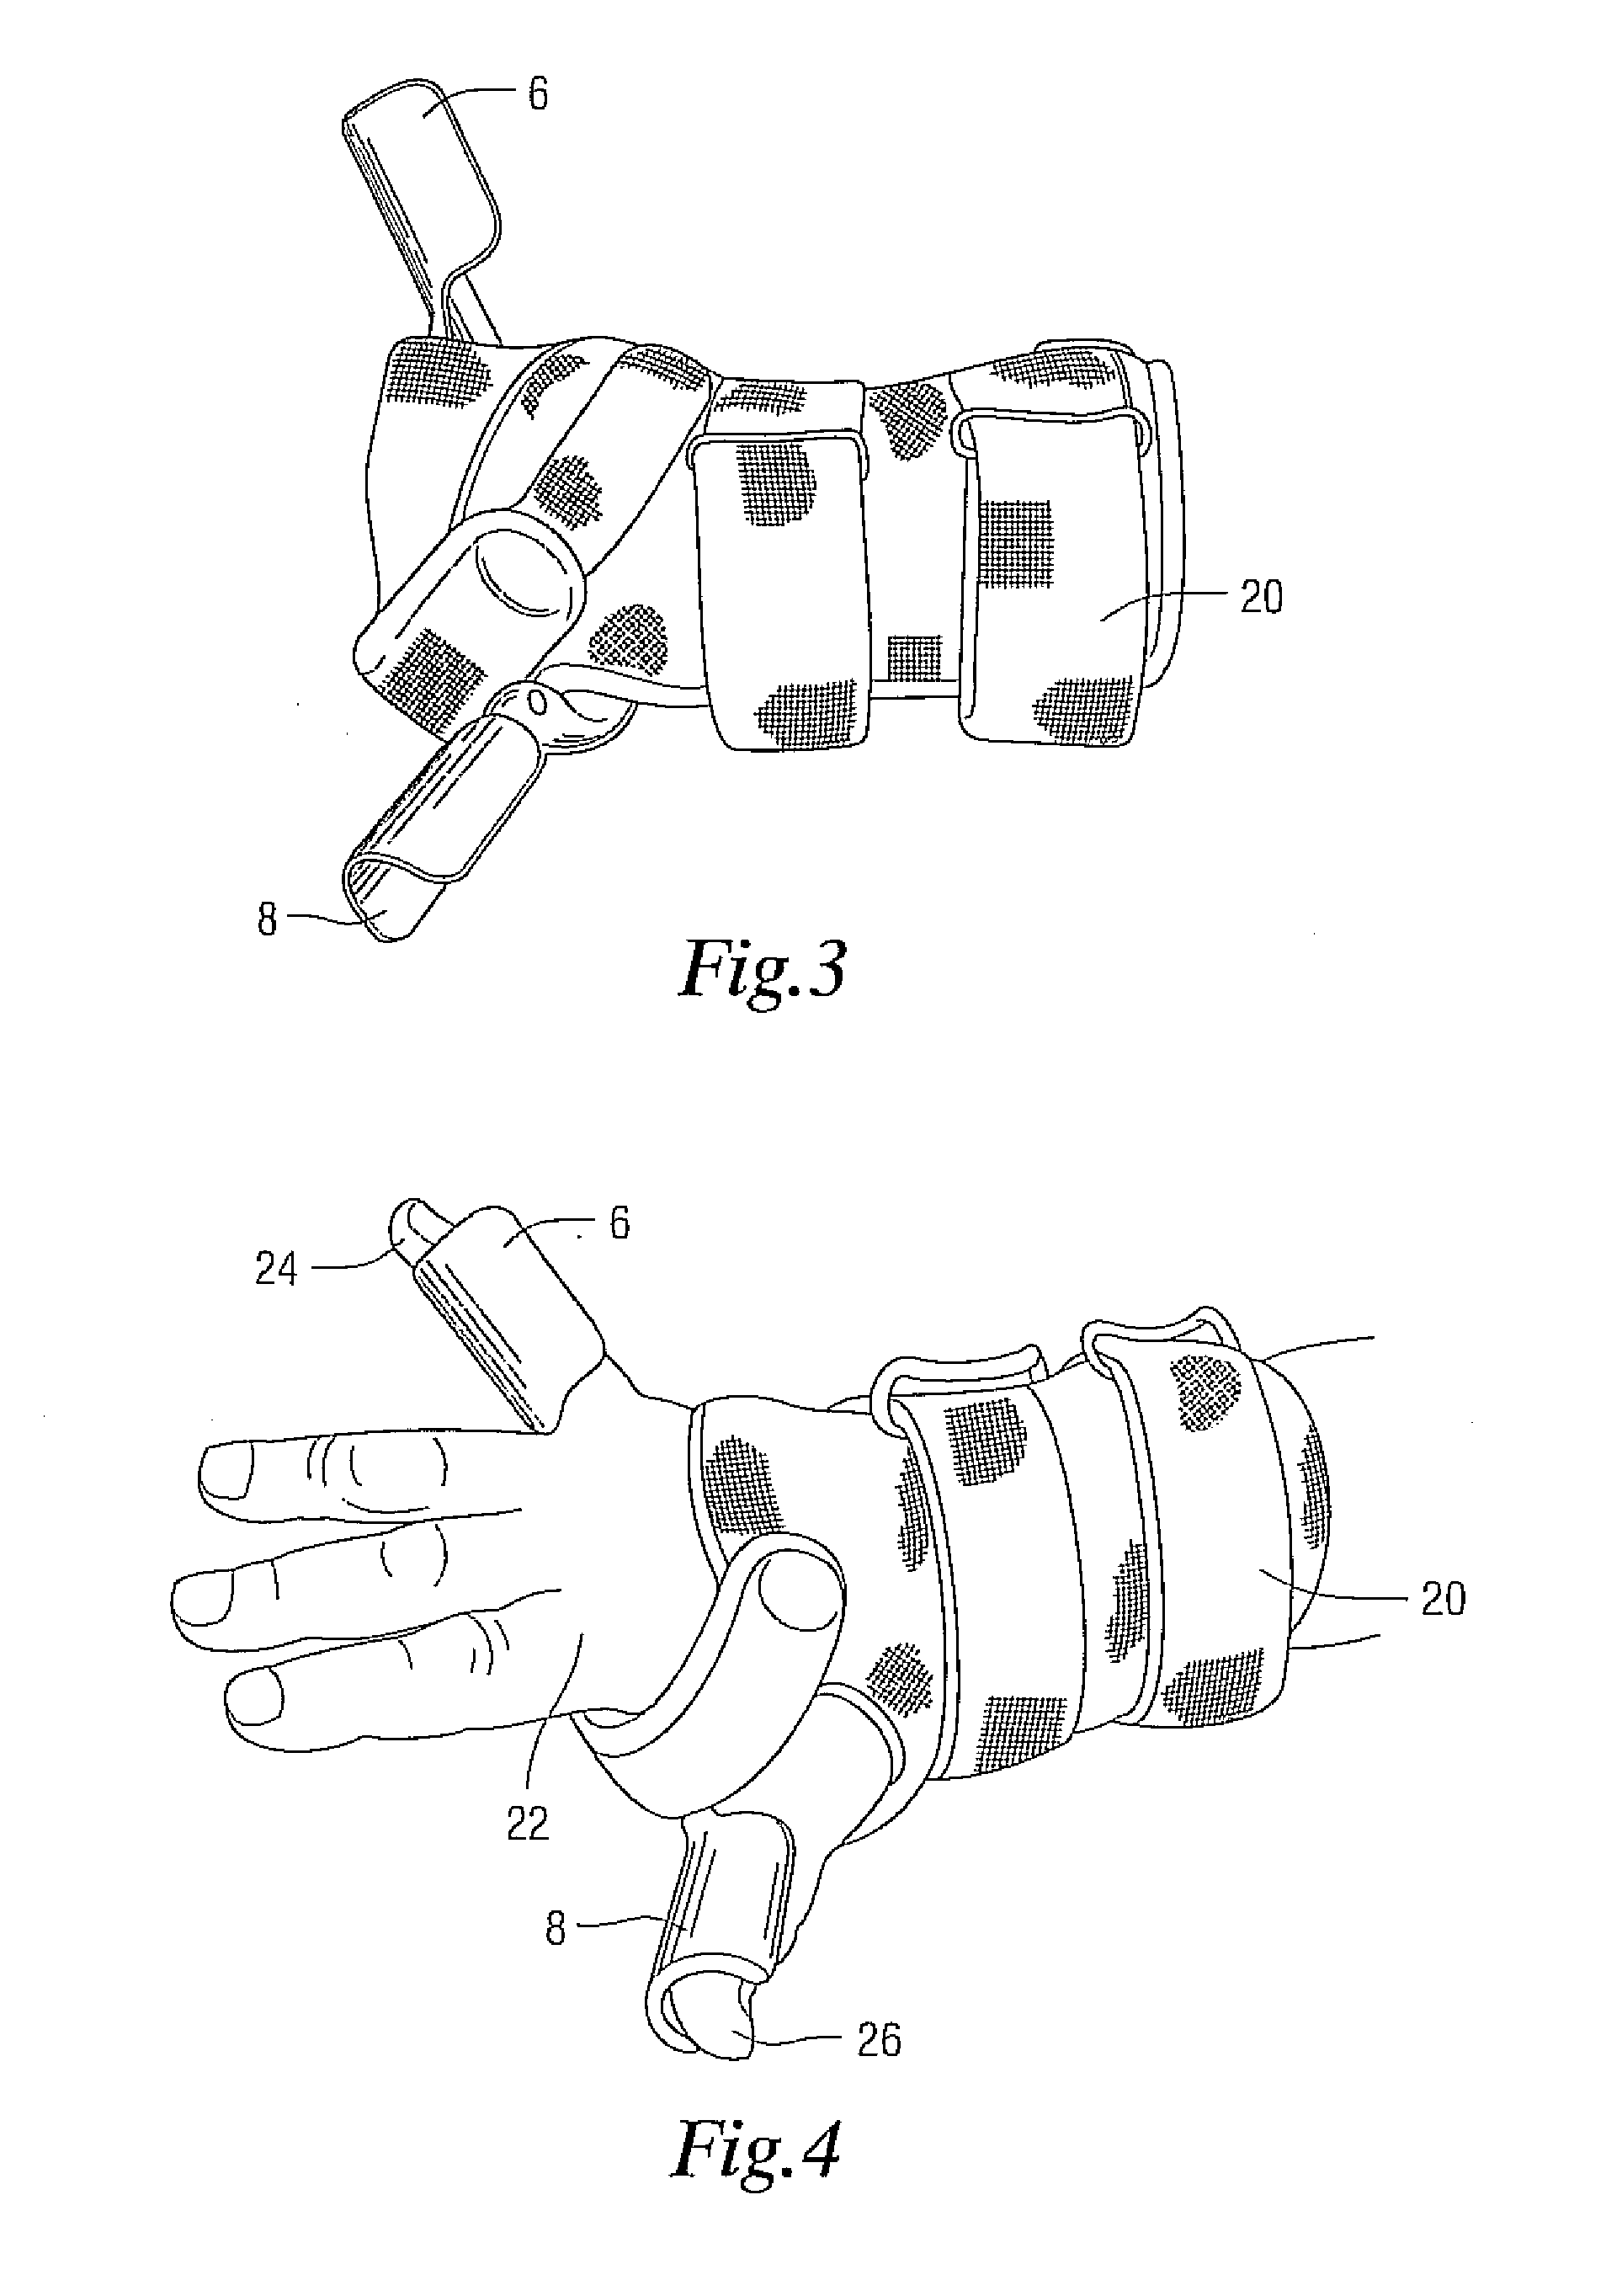 Method and Apparatus for Treating Carpal Tunnel Syndrome